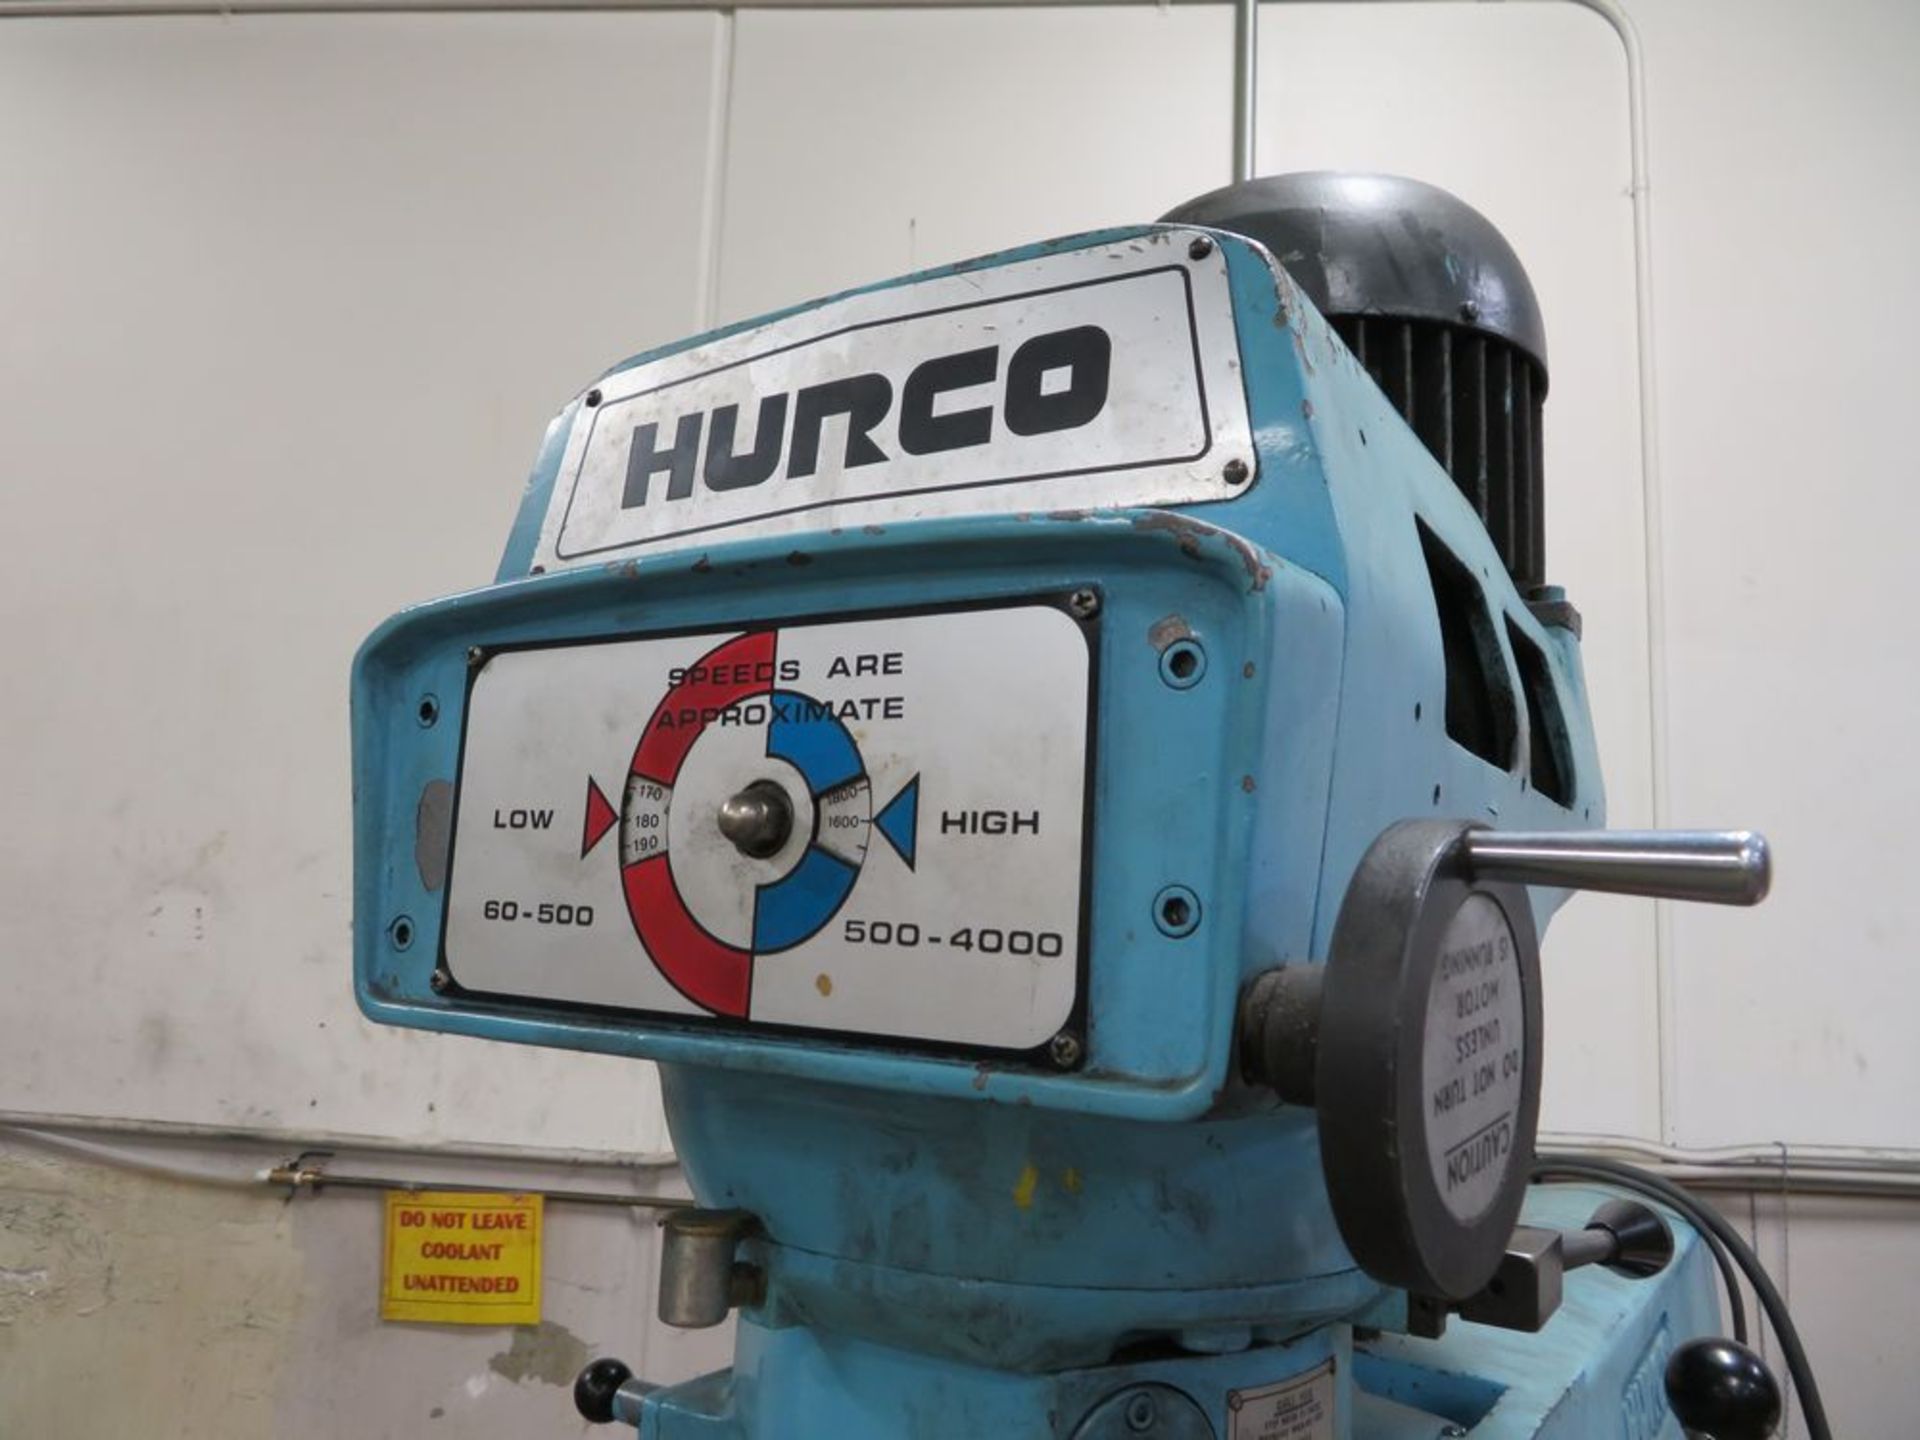 Hurco Vertical Mill, 9'' x 42'' Table w/ Power Feed Variable Speed Drive (No Rotary Table) - Image 2 of 3